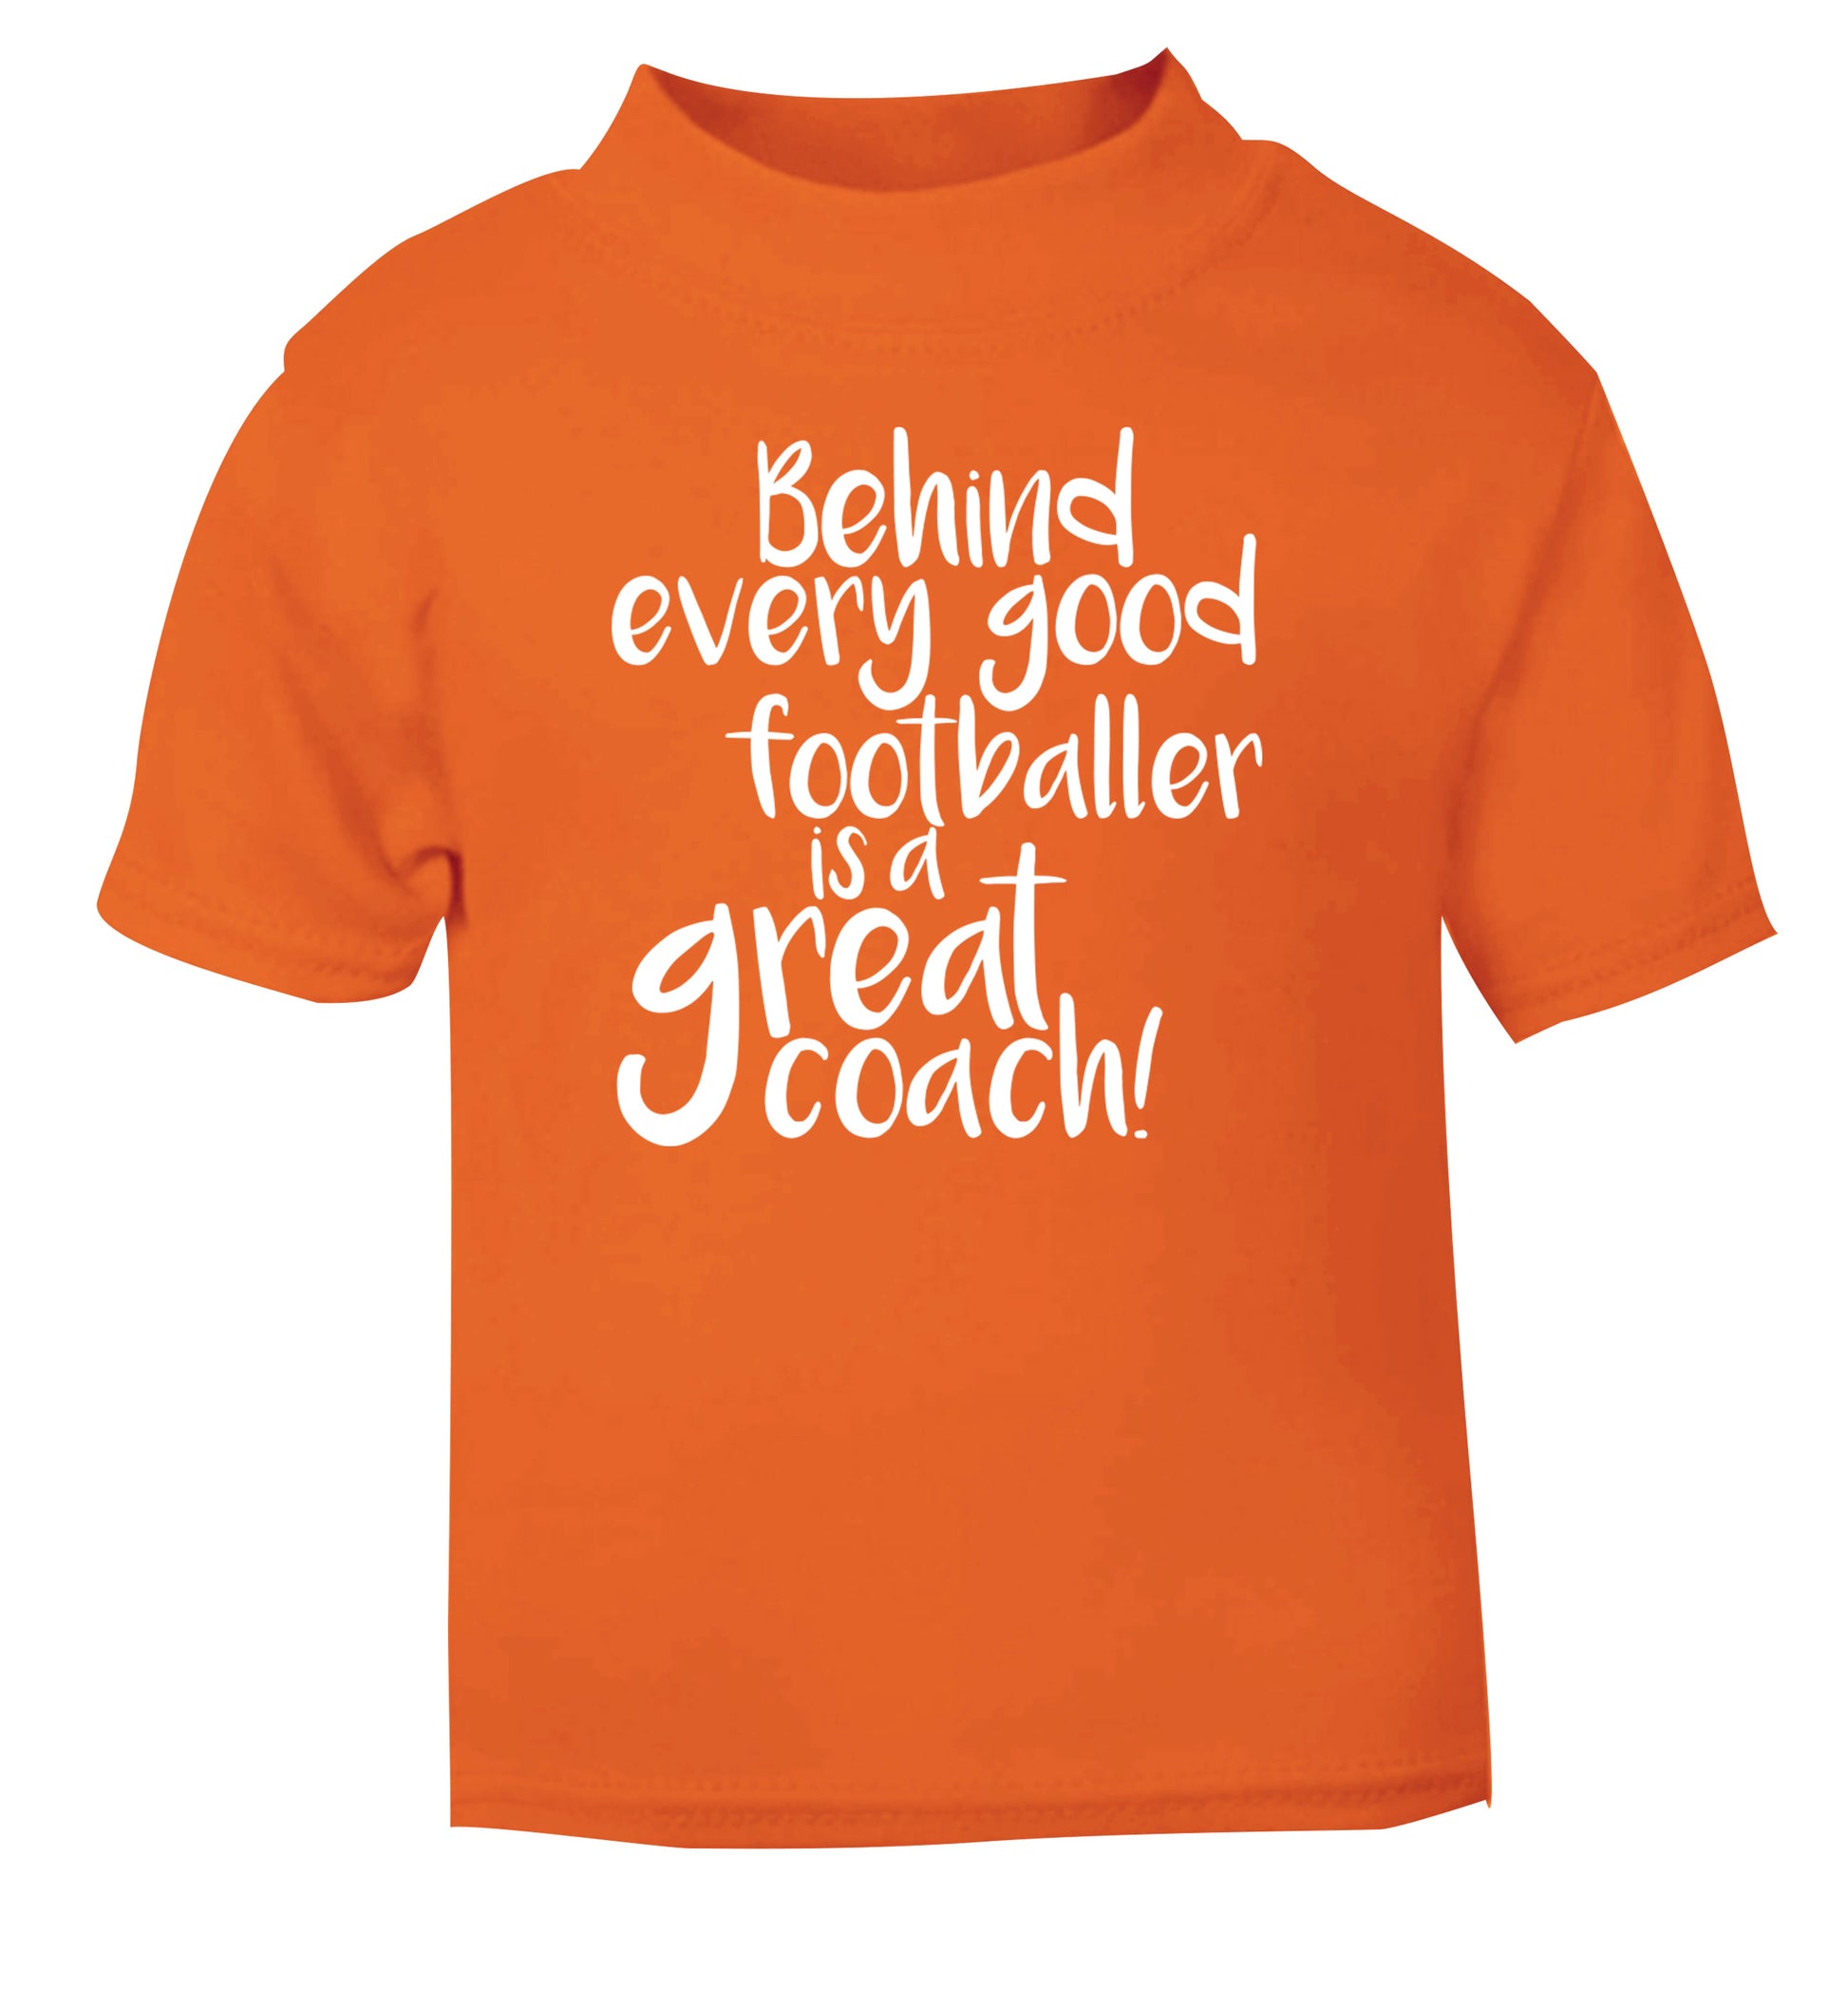 Behind every good footballer is a great coach! orange Baby Toddler Tshirt 2 Years